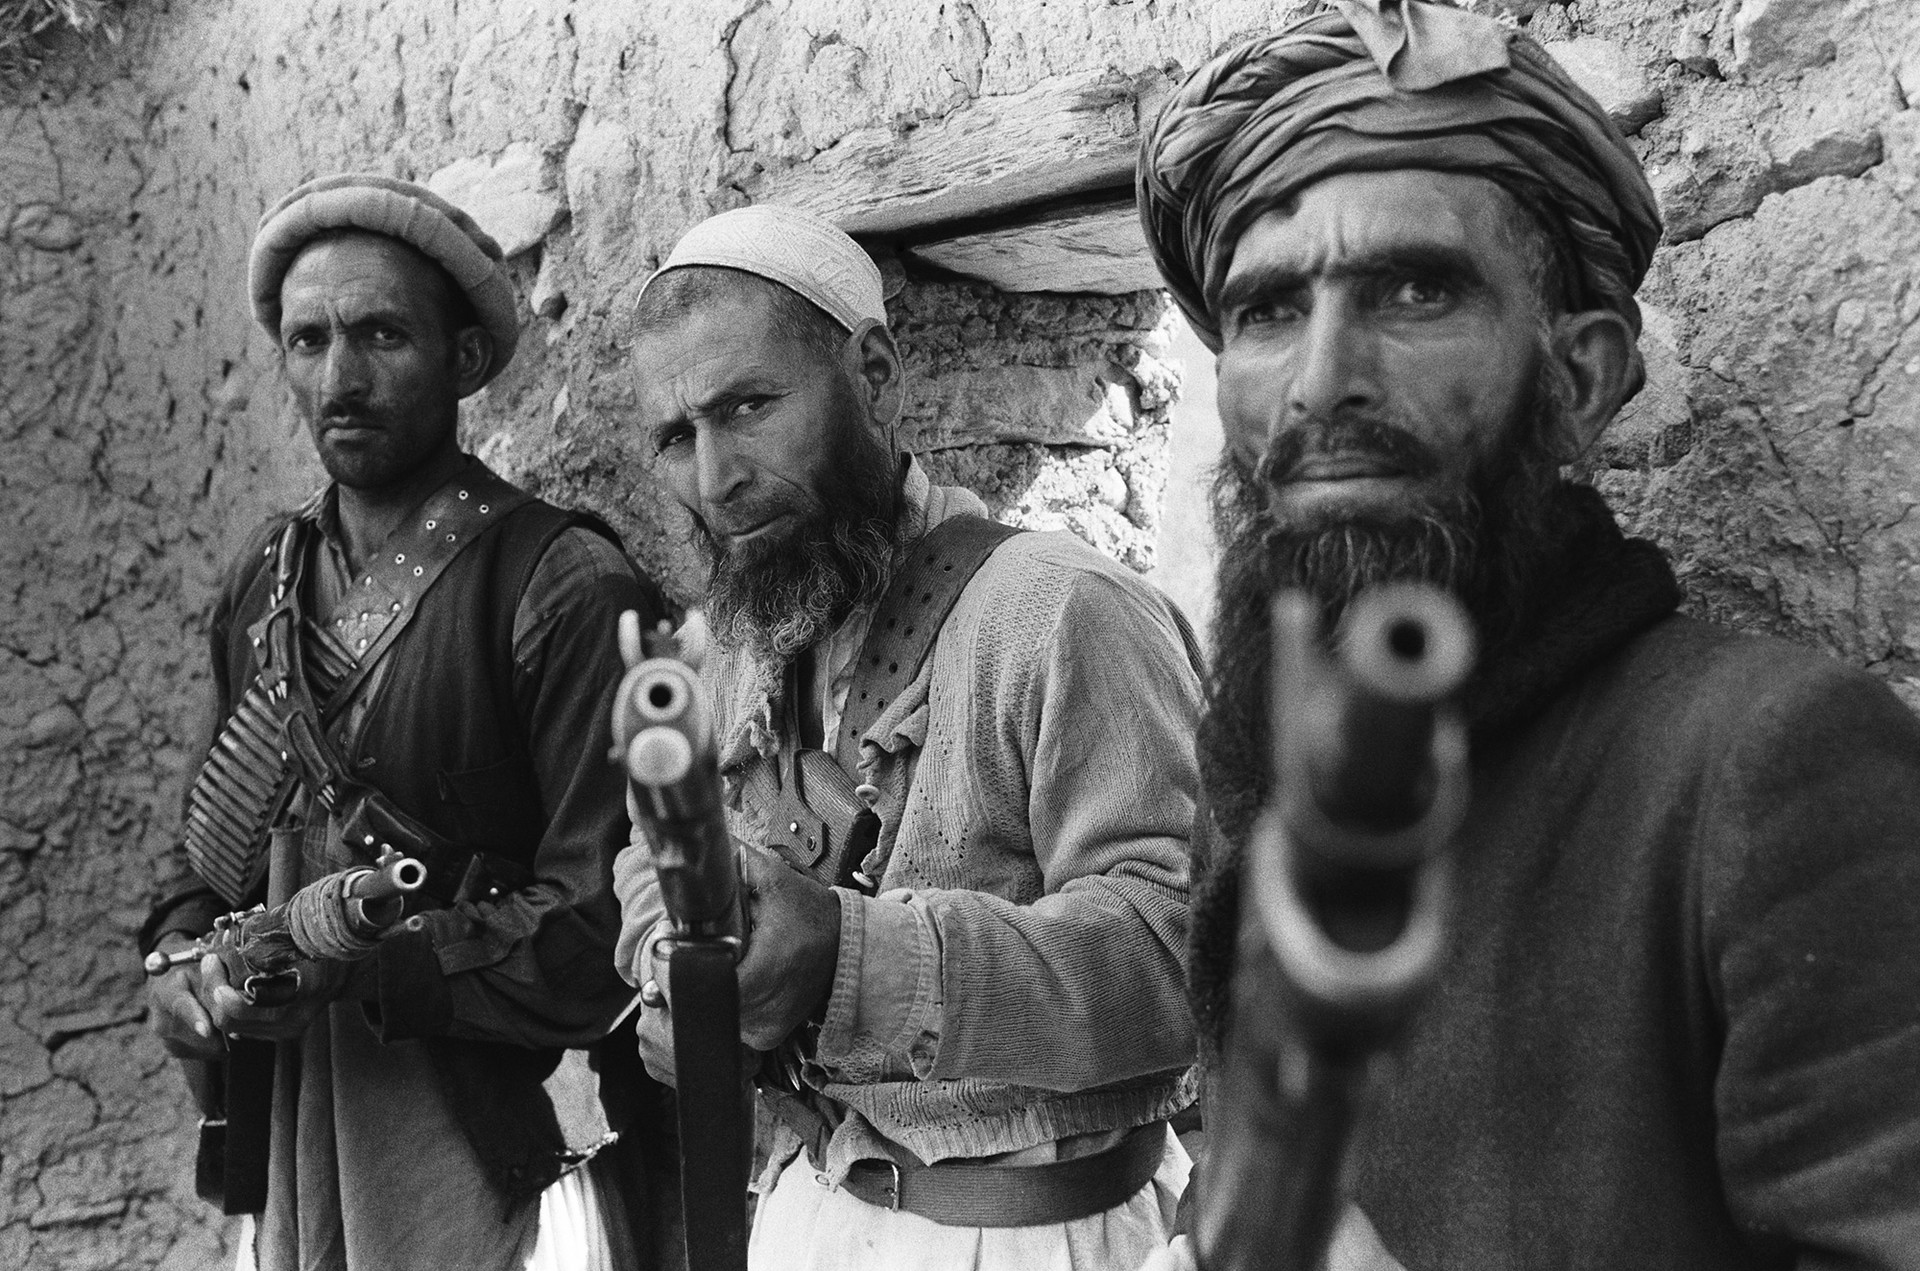 The Mujahedeen - Islamist fighters who opposed the USSR and pro-Soviet government in 1979-1989. 